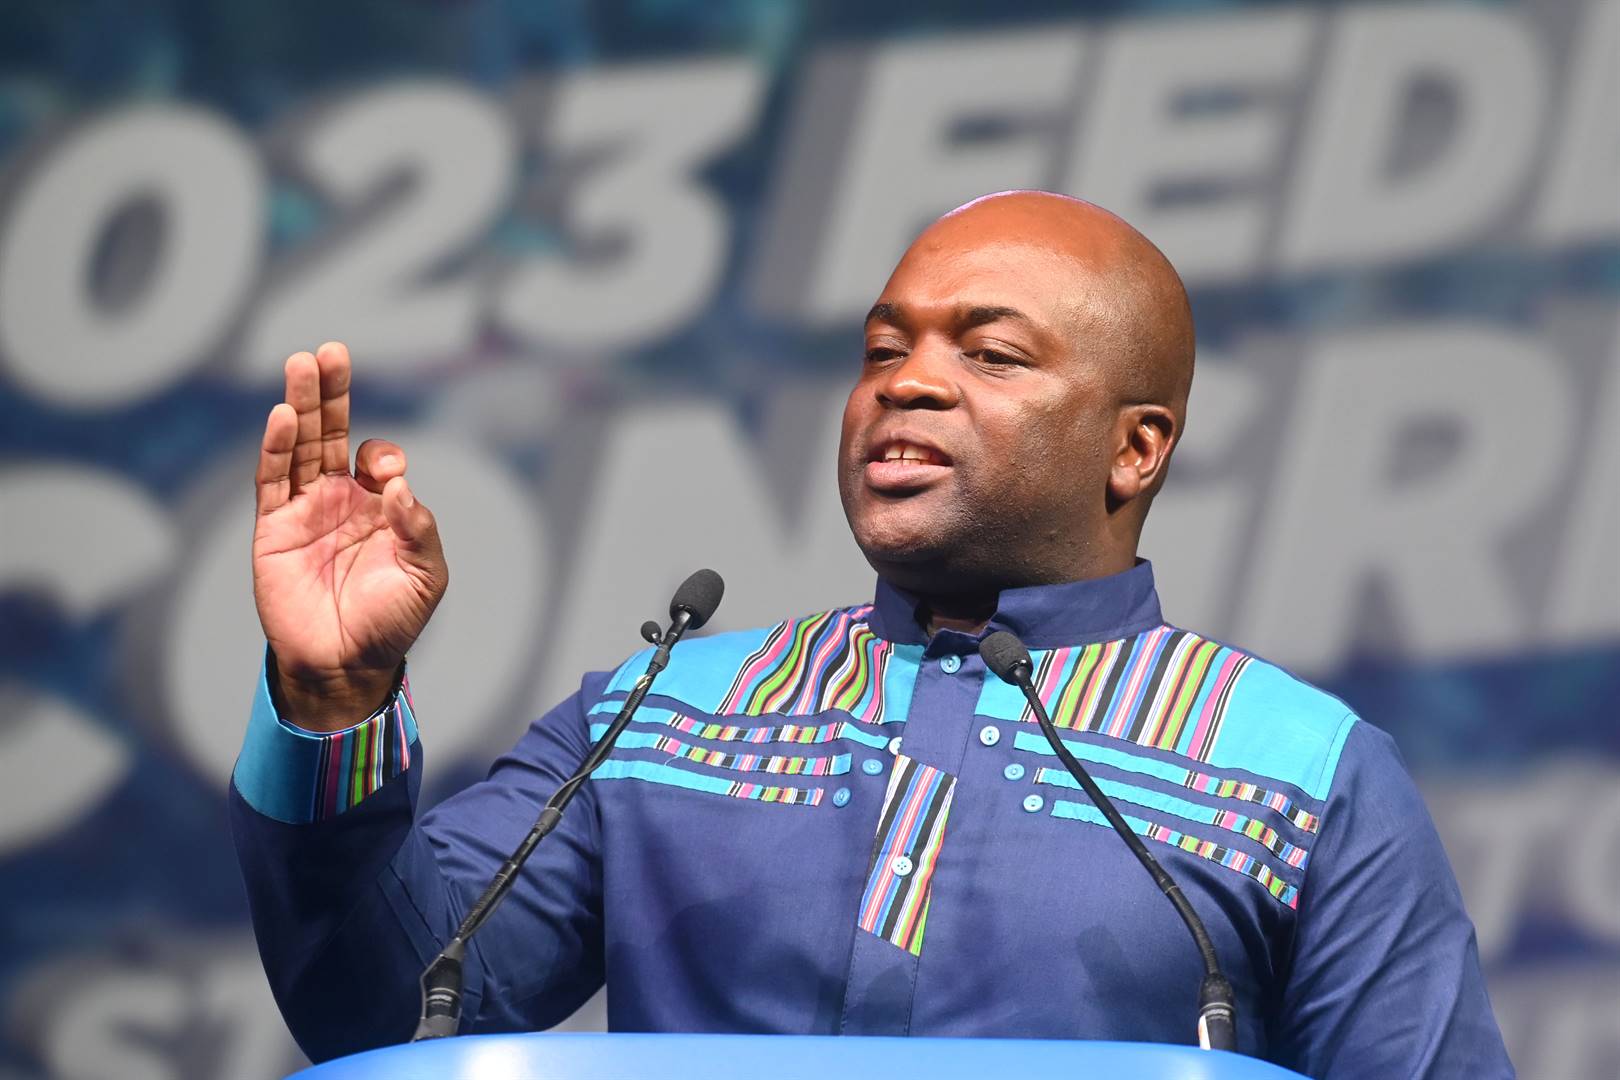 DA Gauteng premier candidate Solly Msimanga said another key “success” the DA achieved was the official scrapping of e-tolls 